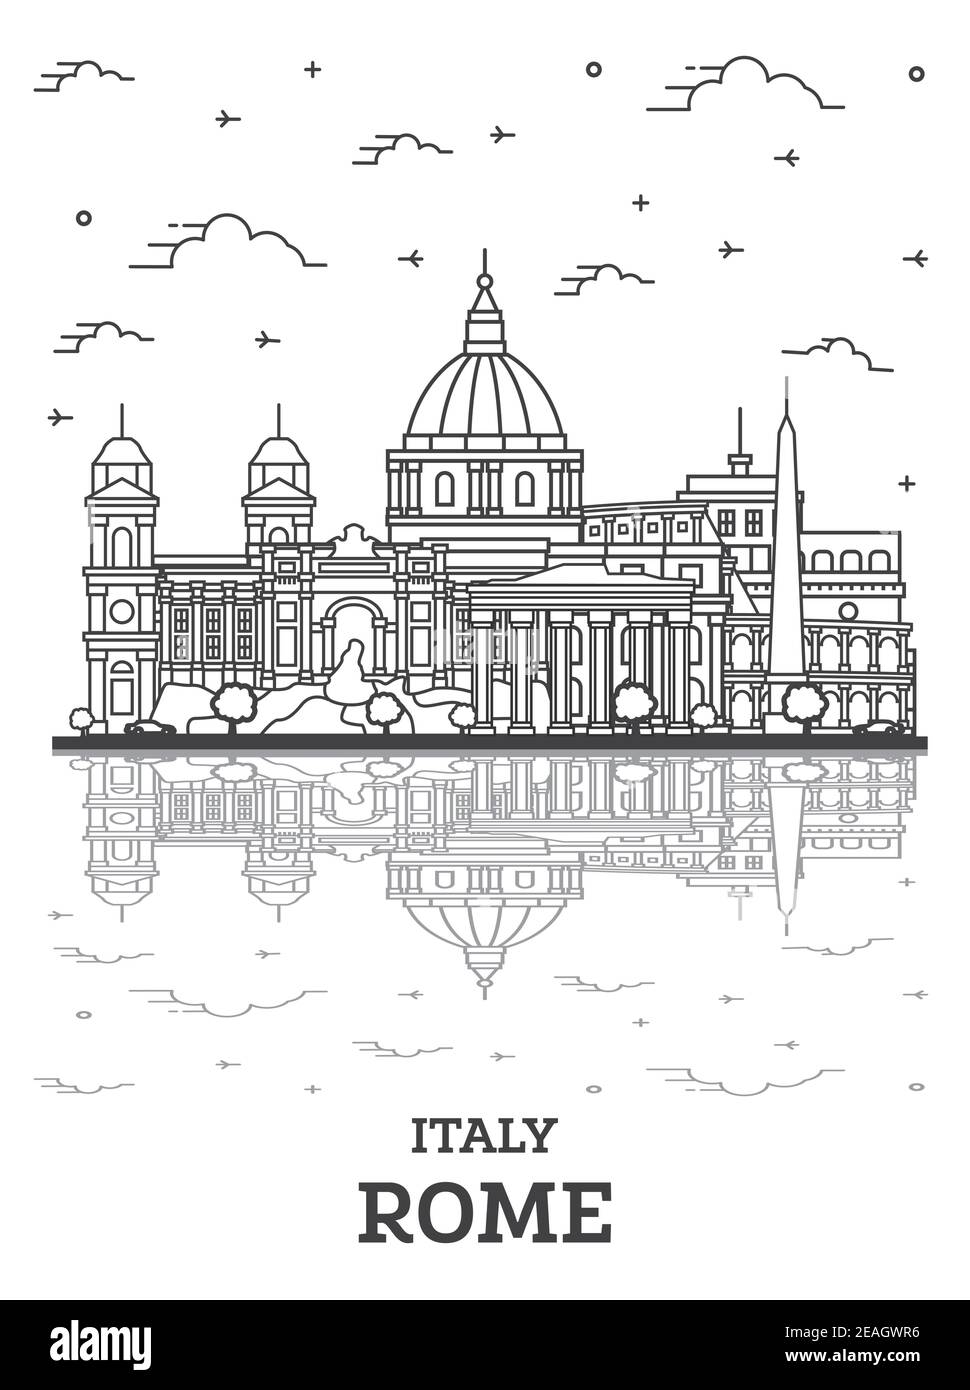 Outline Rome Italy City Skyline with Historic Buildings and Reflections Isolated on White. Vector Illustration. Rome Cityscape with Landmarks. Stock Vector